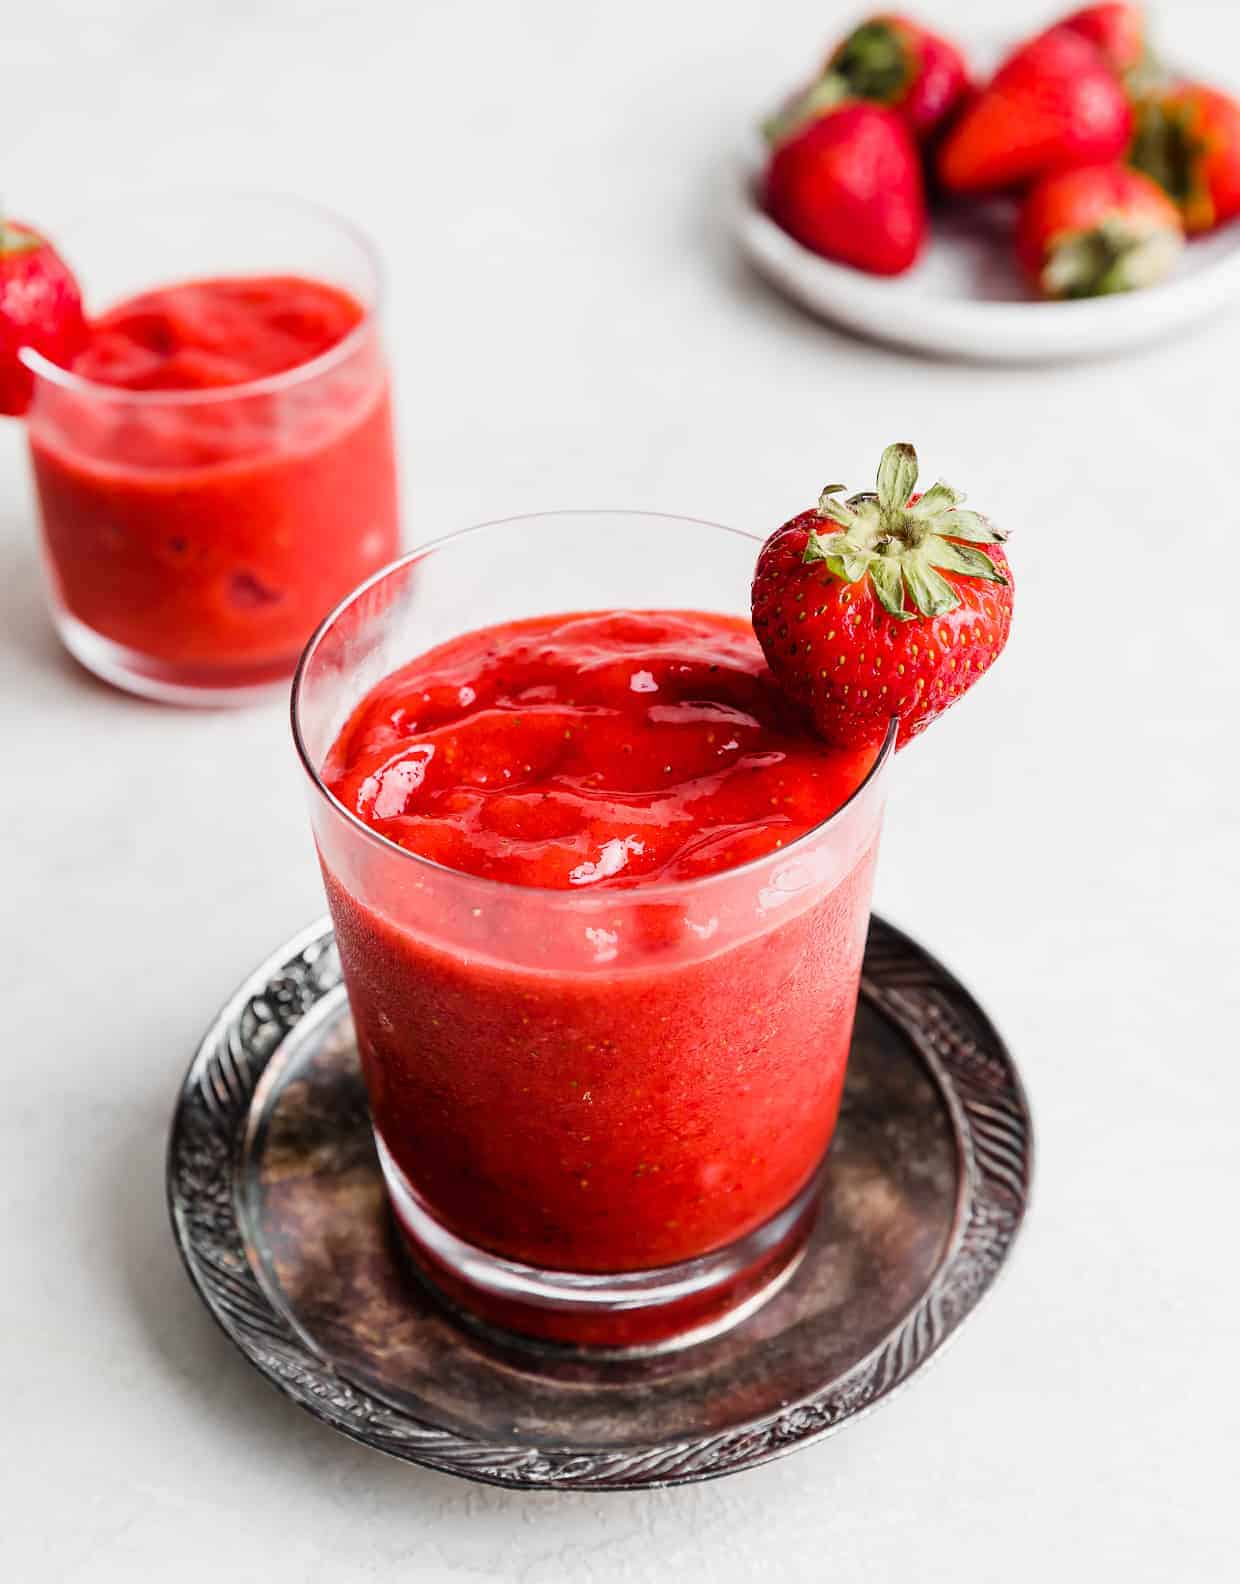 A glass cup with Virgin Strawberry Daiquiri in it with a full strawberry garnish on the brim.